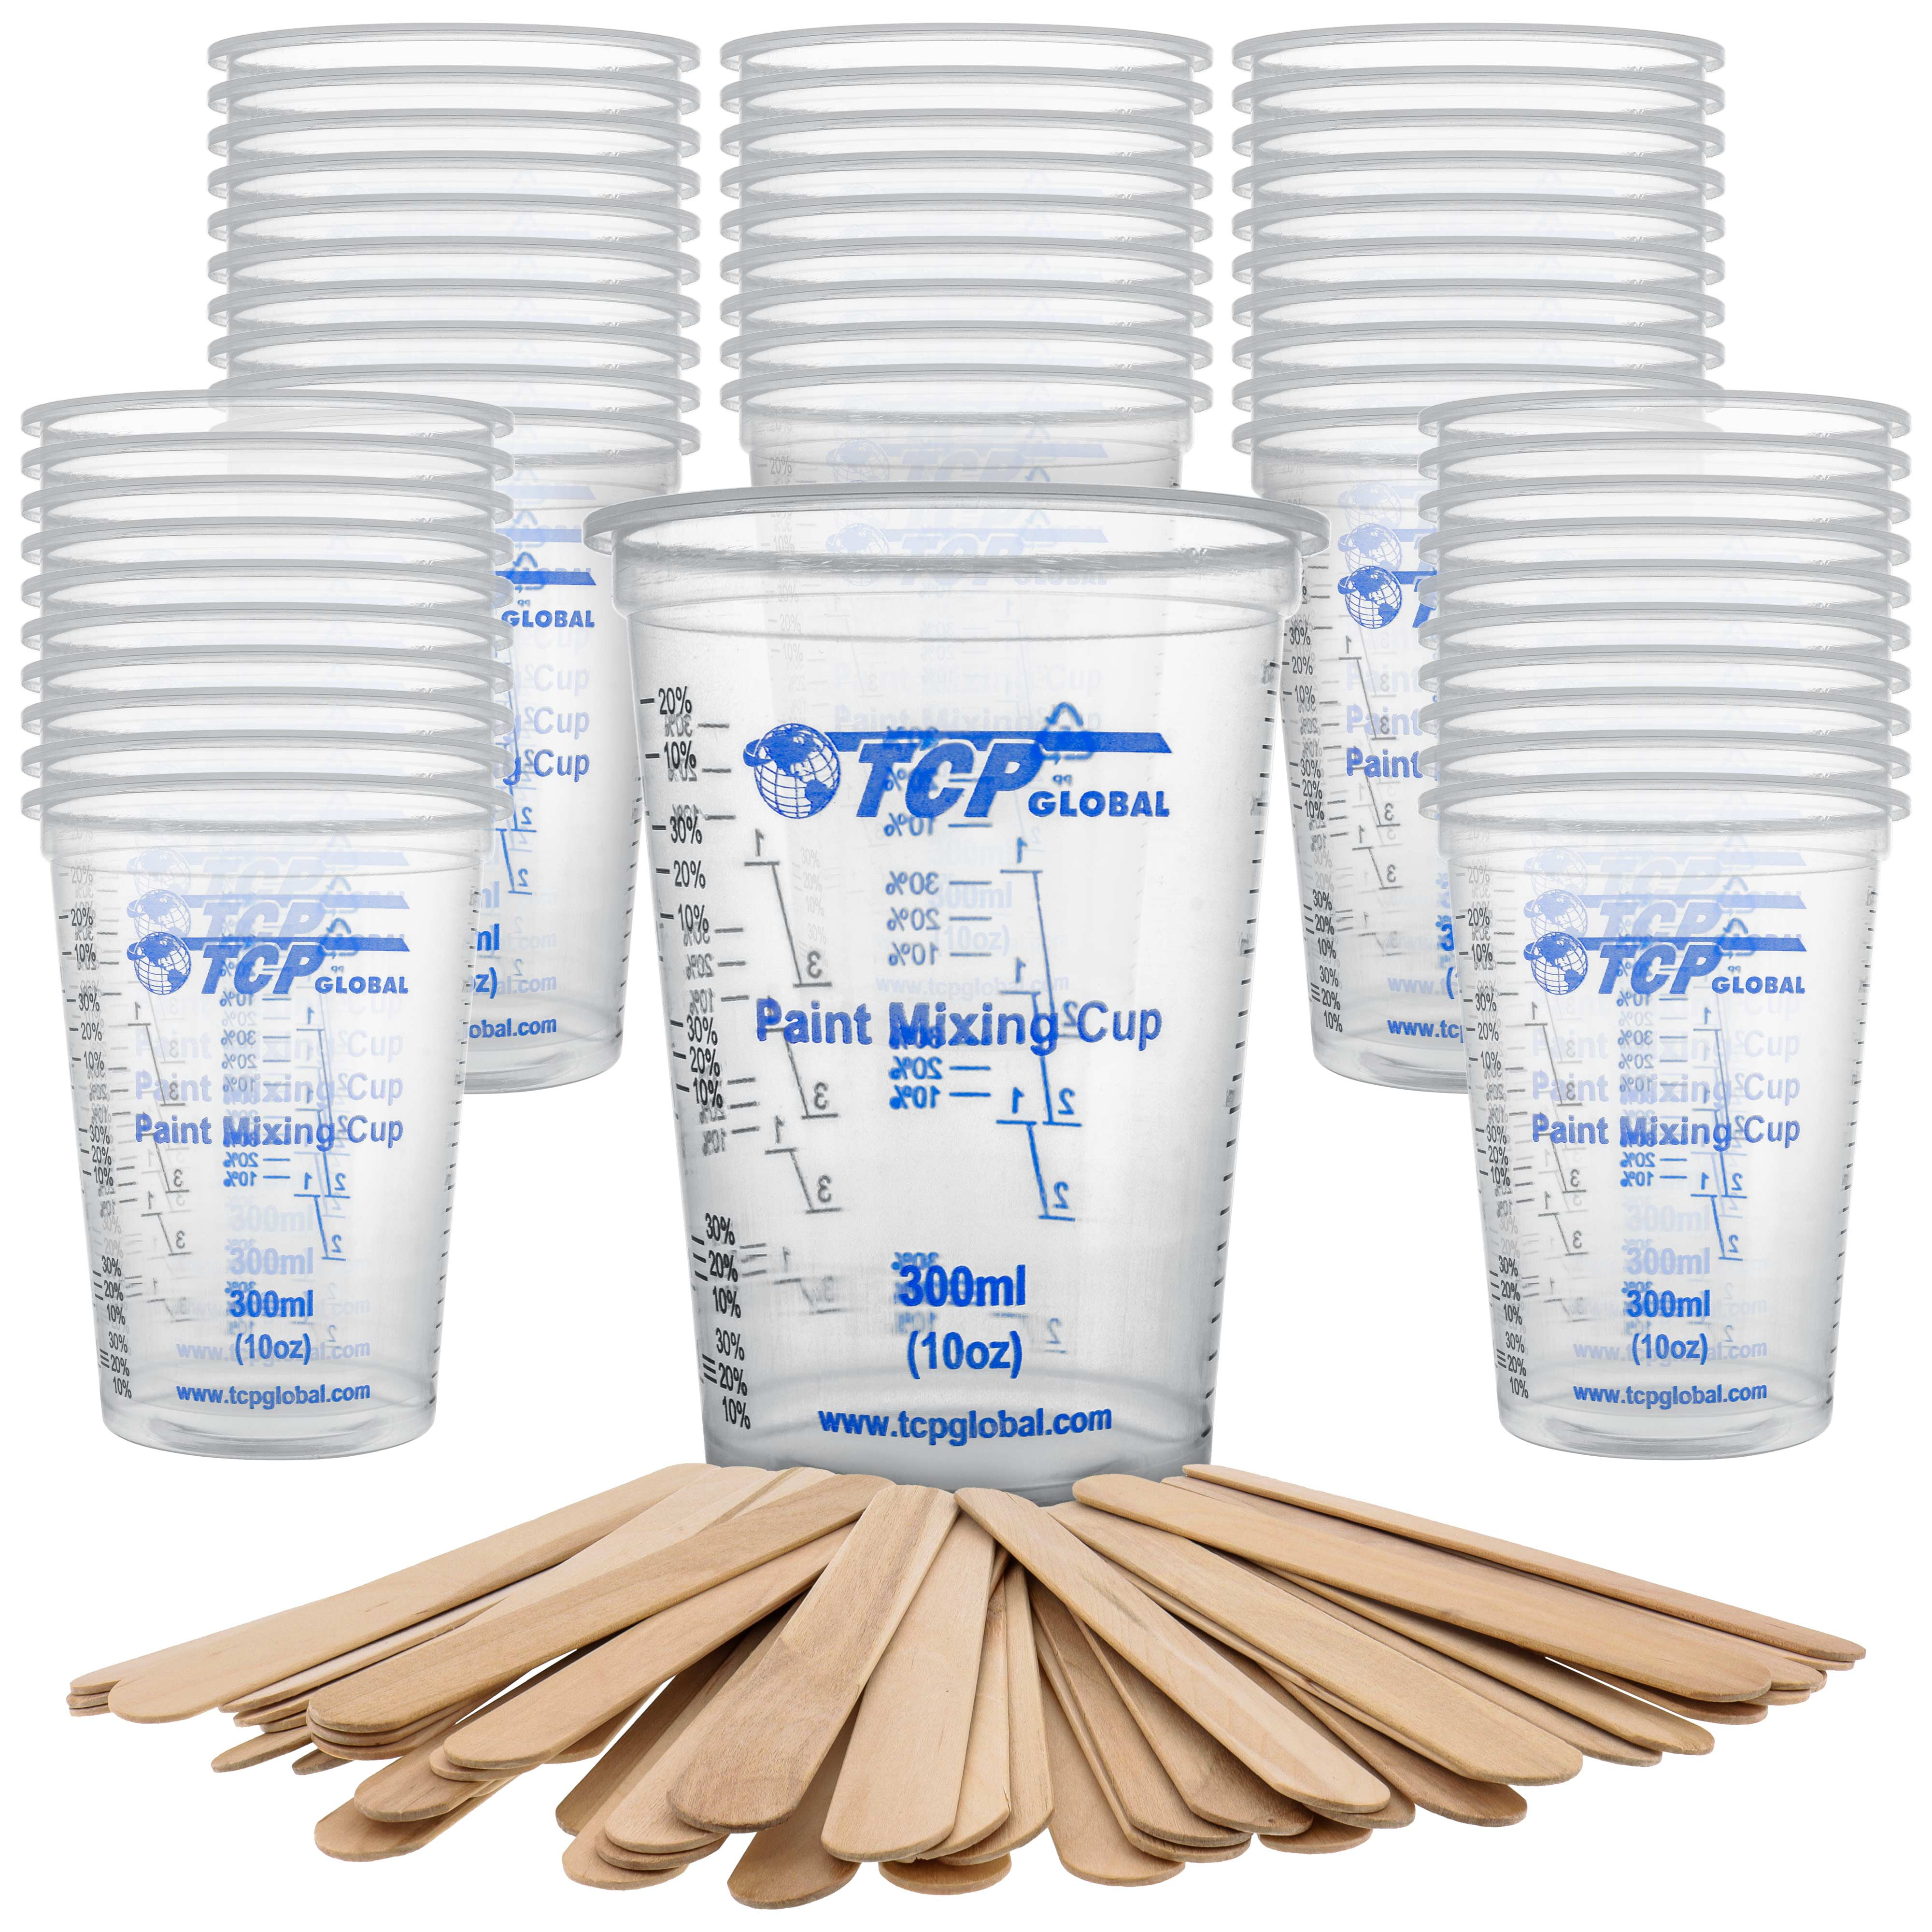 Box of 50 Lids - Half Gallon Size - Exclusivly Fit Custom Shop /tcp Global 64 Ounce Paint Mix Cups by TCPGLOBAL